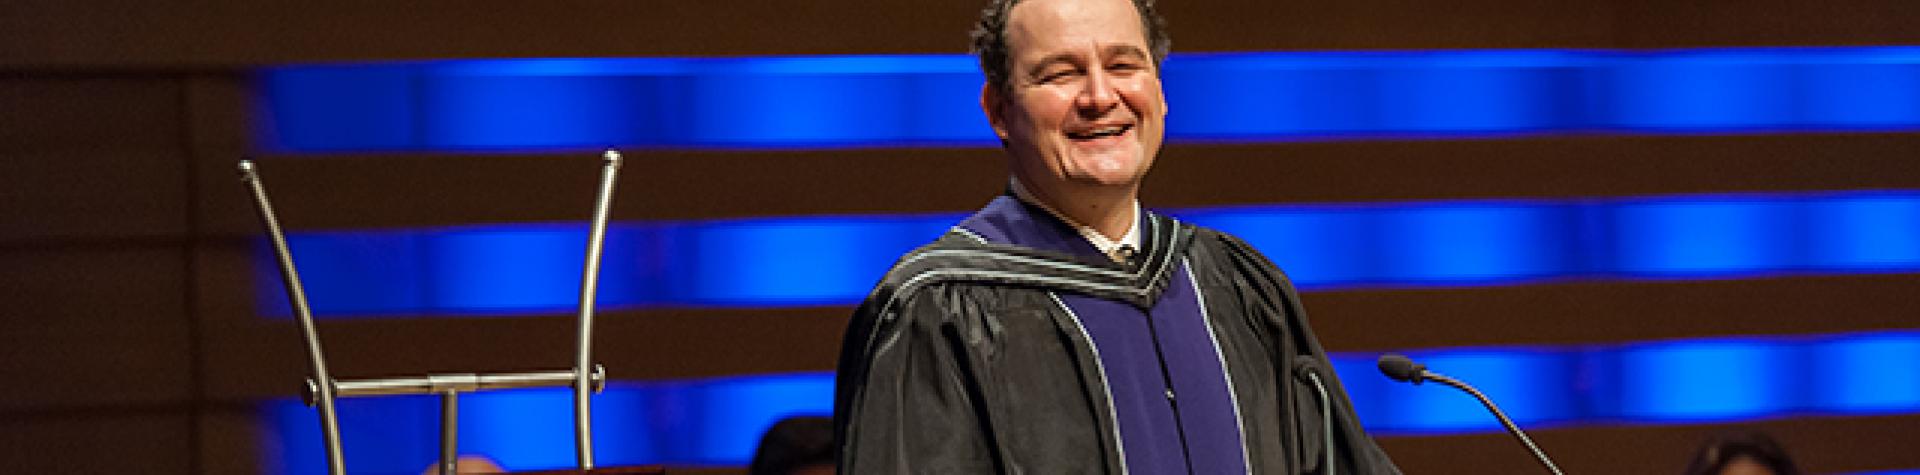 Royal Conservatory Alumnus and Honorary Fellow Russell Braun